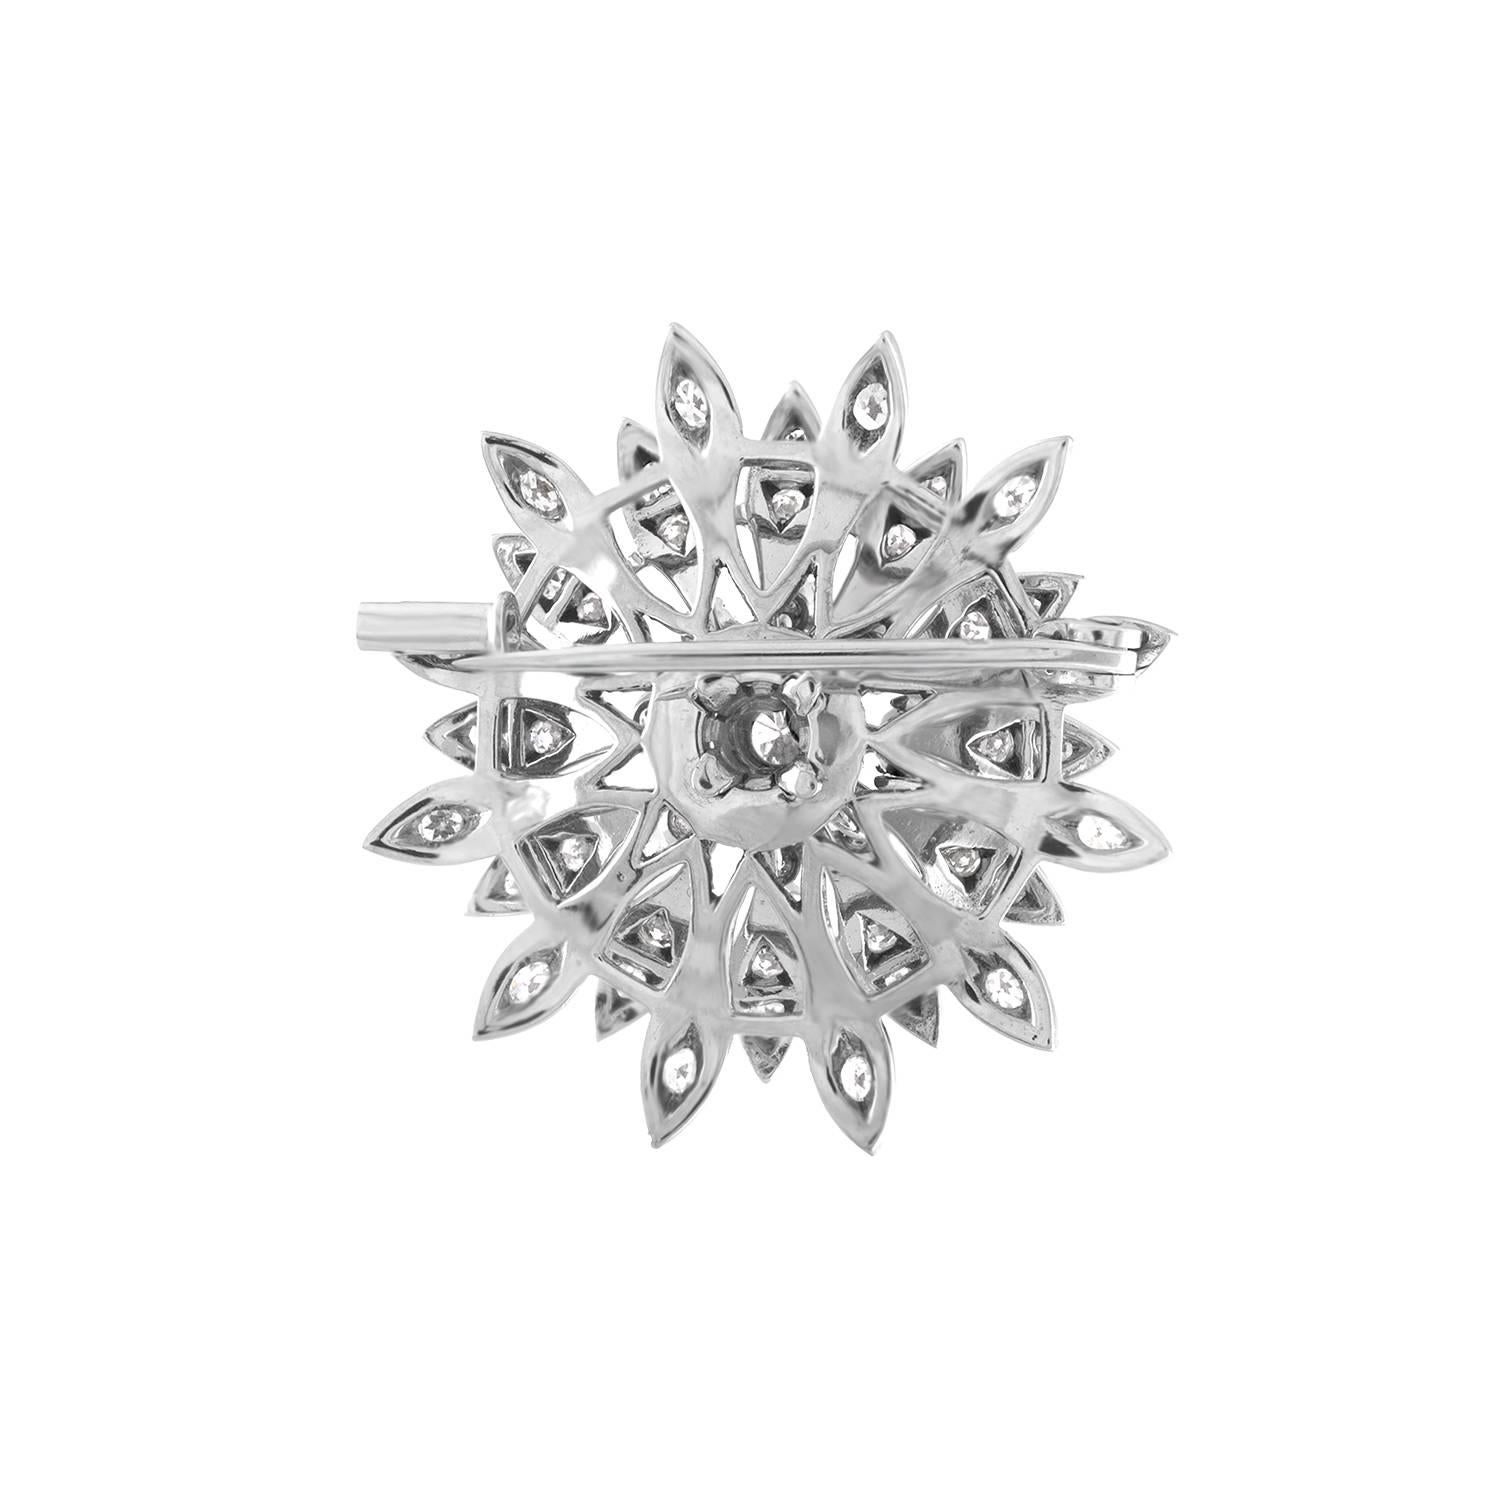 Beautiful Delicate Flower Brooch
The brooch is 18K White Gold
There are 1.50 Carats in Diamonds E/F VS
The brooch measures almost 1.25